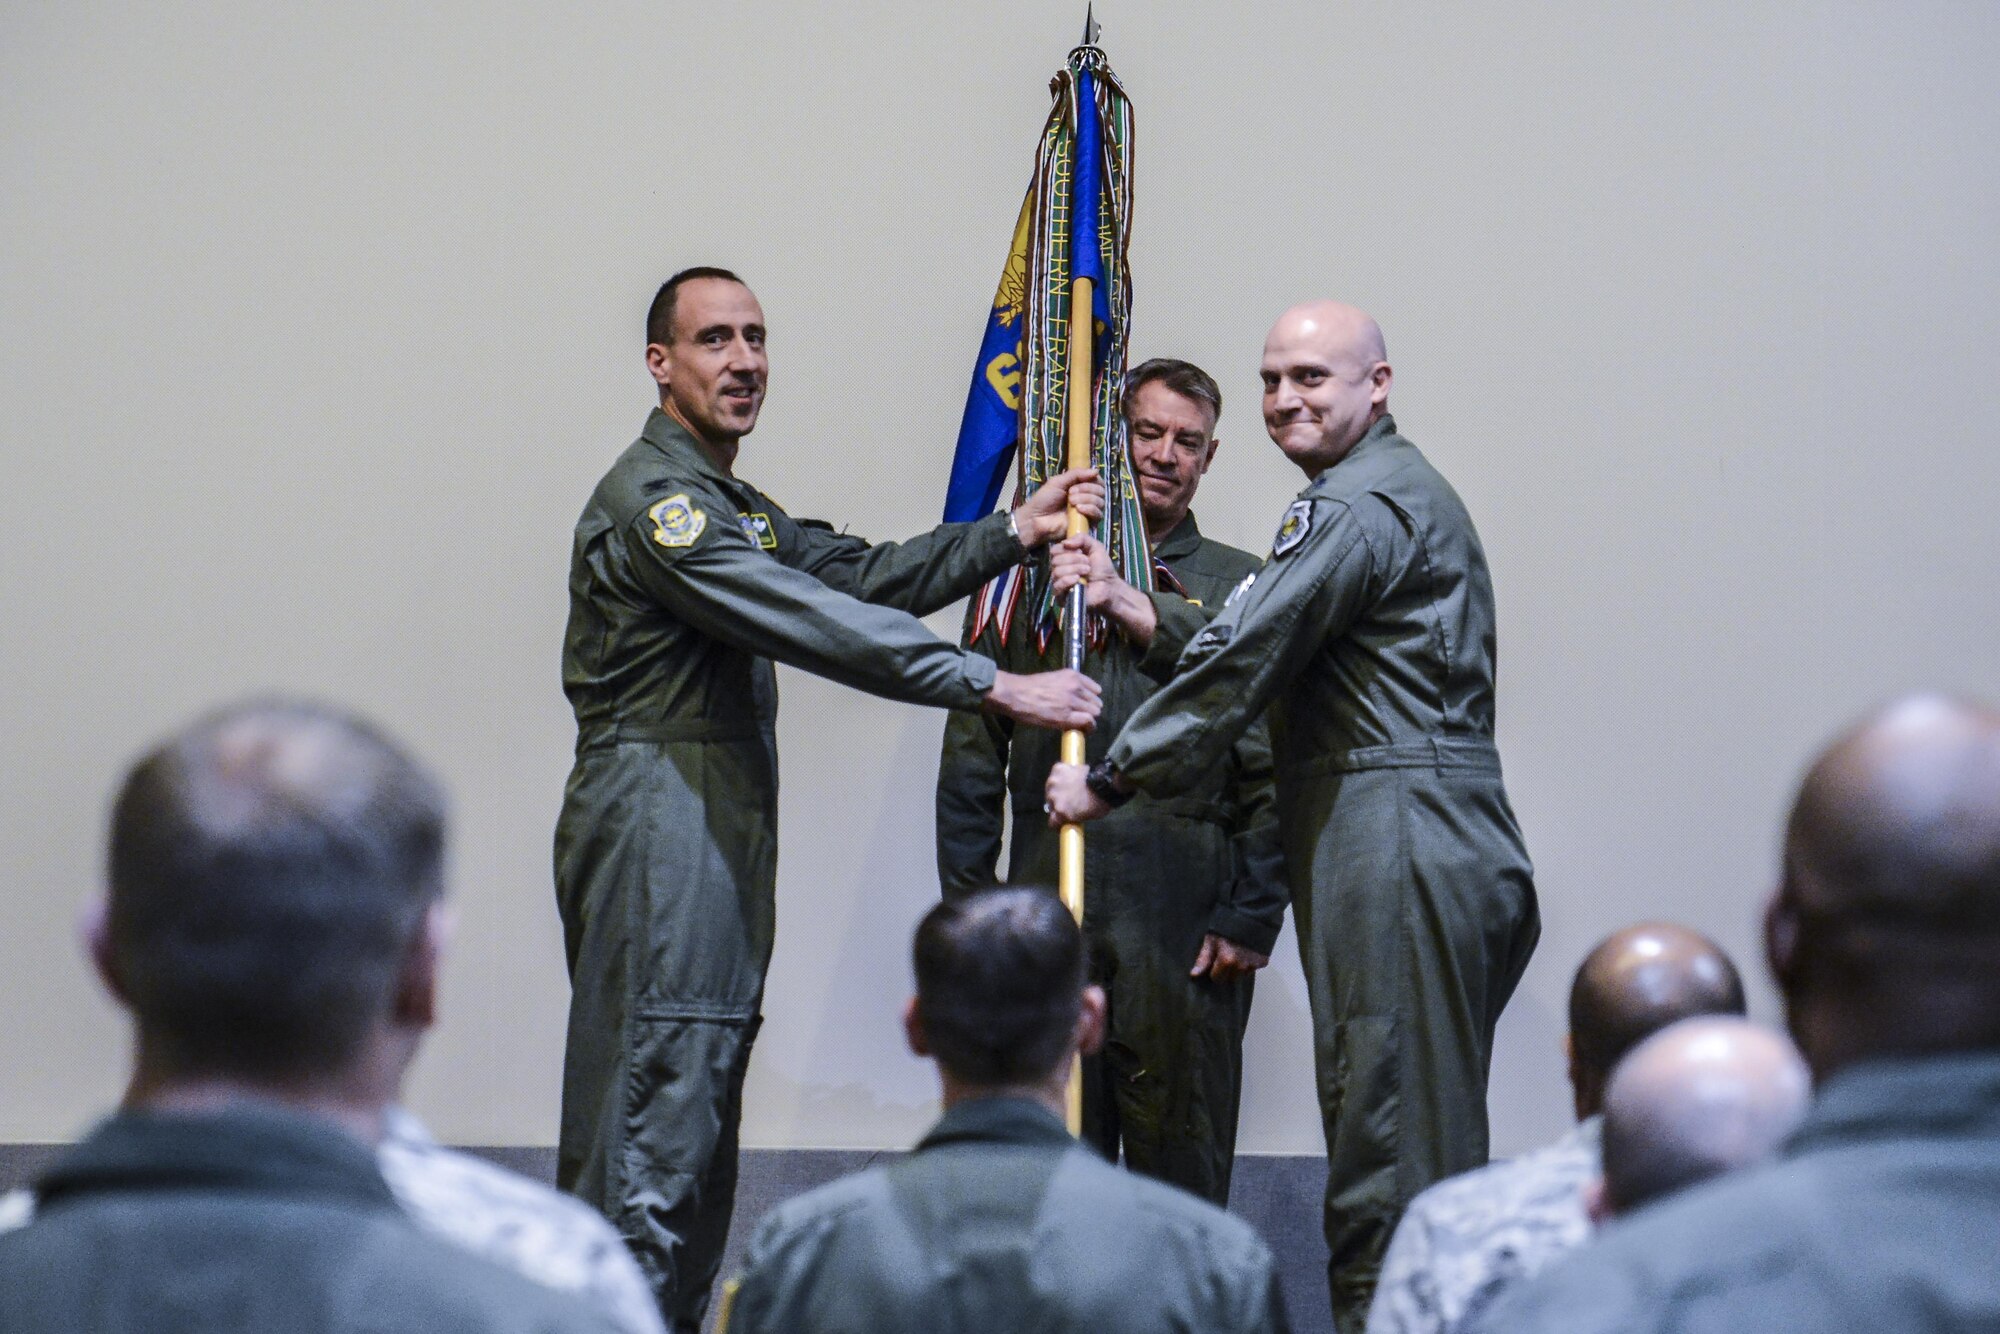 Col. Leonard Kosinski, 62nd Airlift Wing commander, presents the 62nd Operations Group guidon to Lt. Col. Brian Smith, incoming 62nd OG commander during a ceremony Jan. 6, 2017, at Joint Base Lewis-McChord, Wash. The passing of the guidon is a military tradition signifying the official assumption of command.